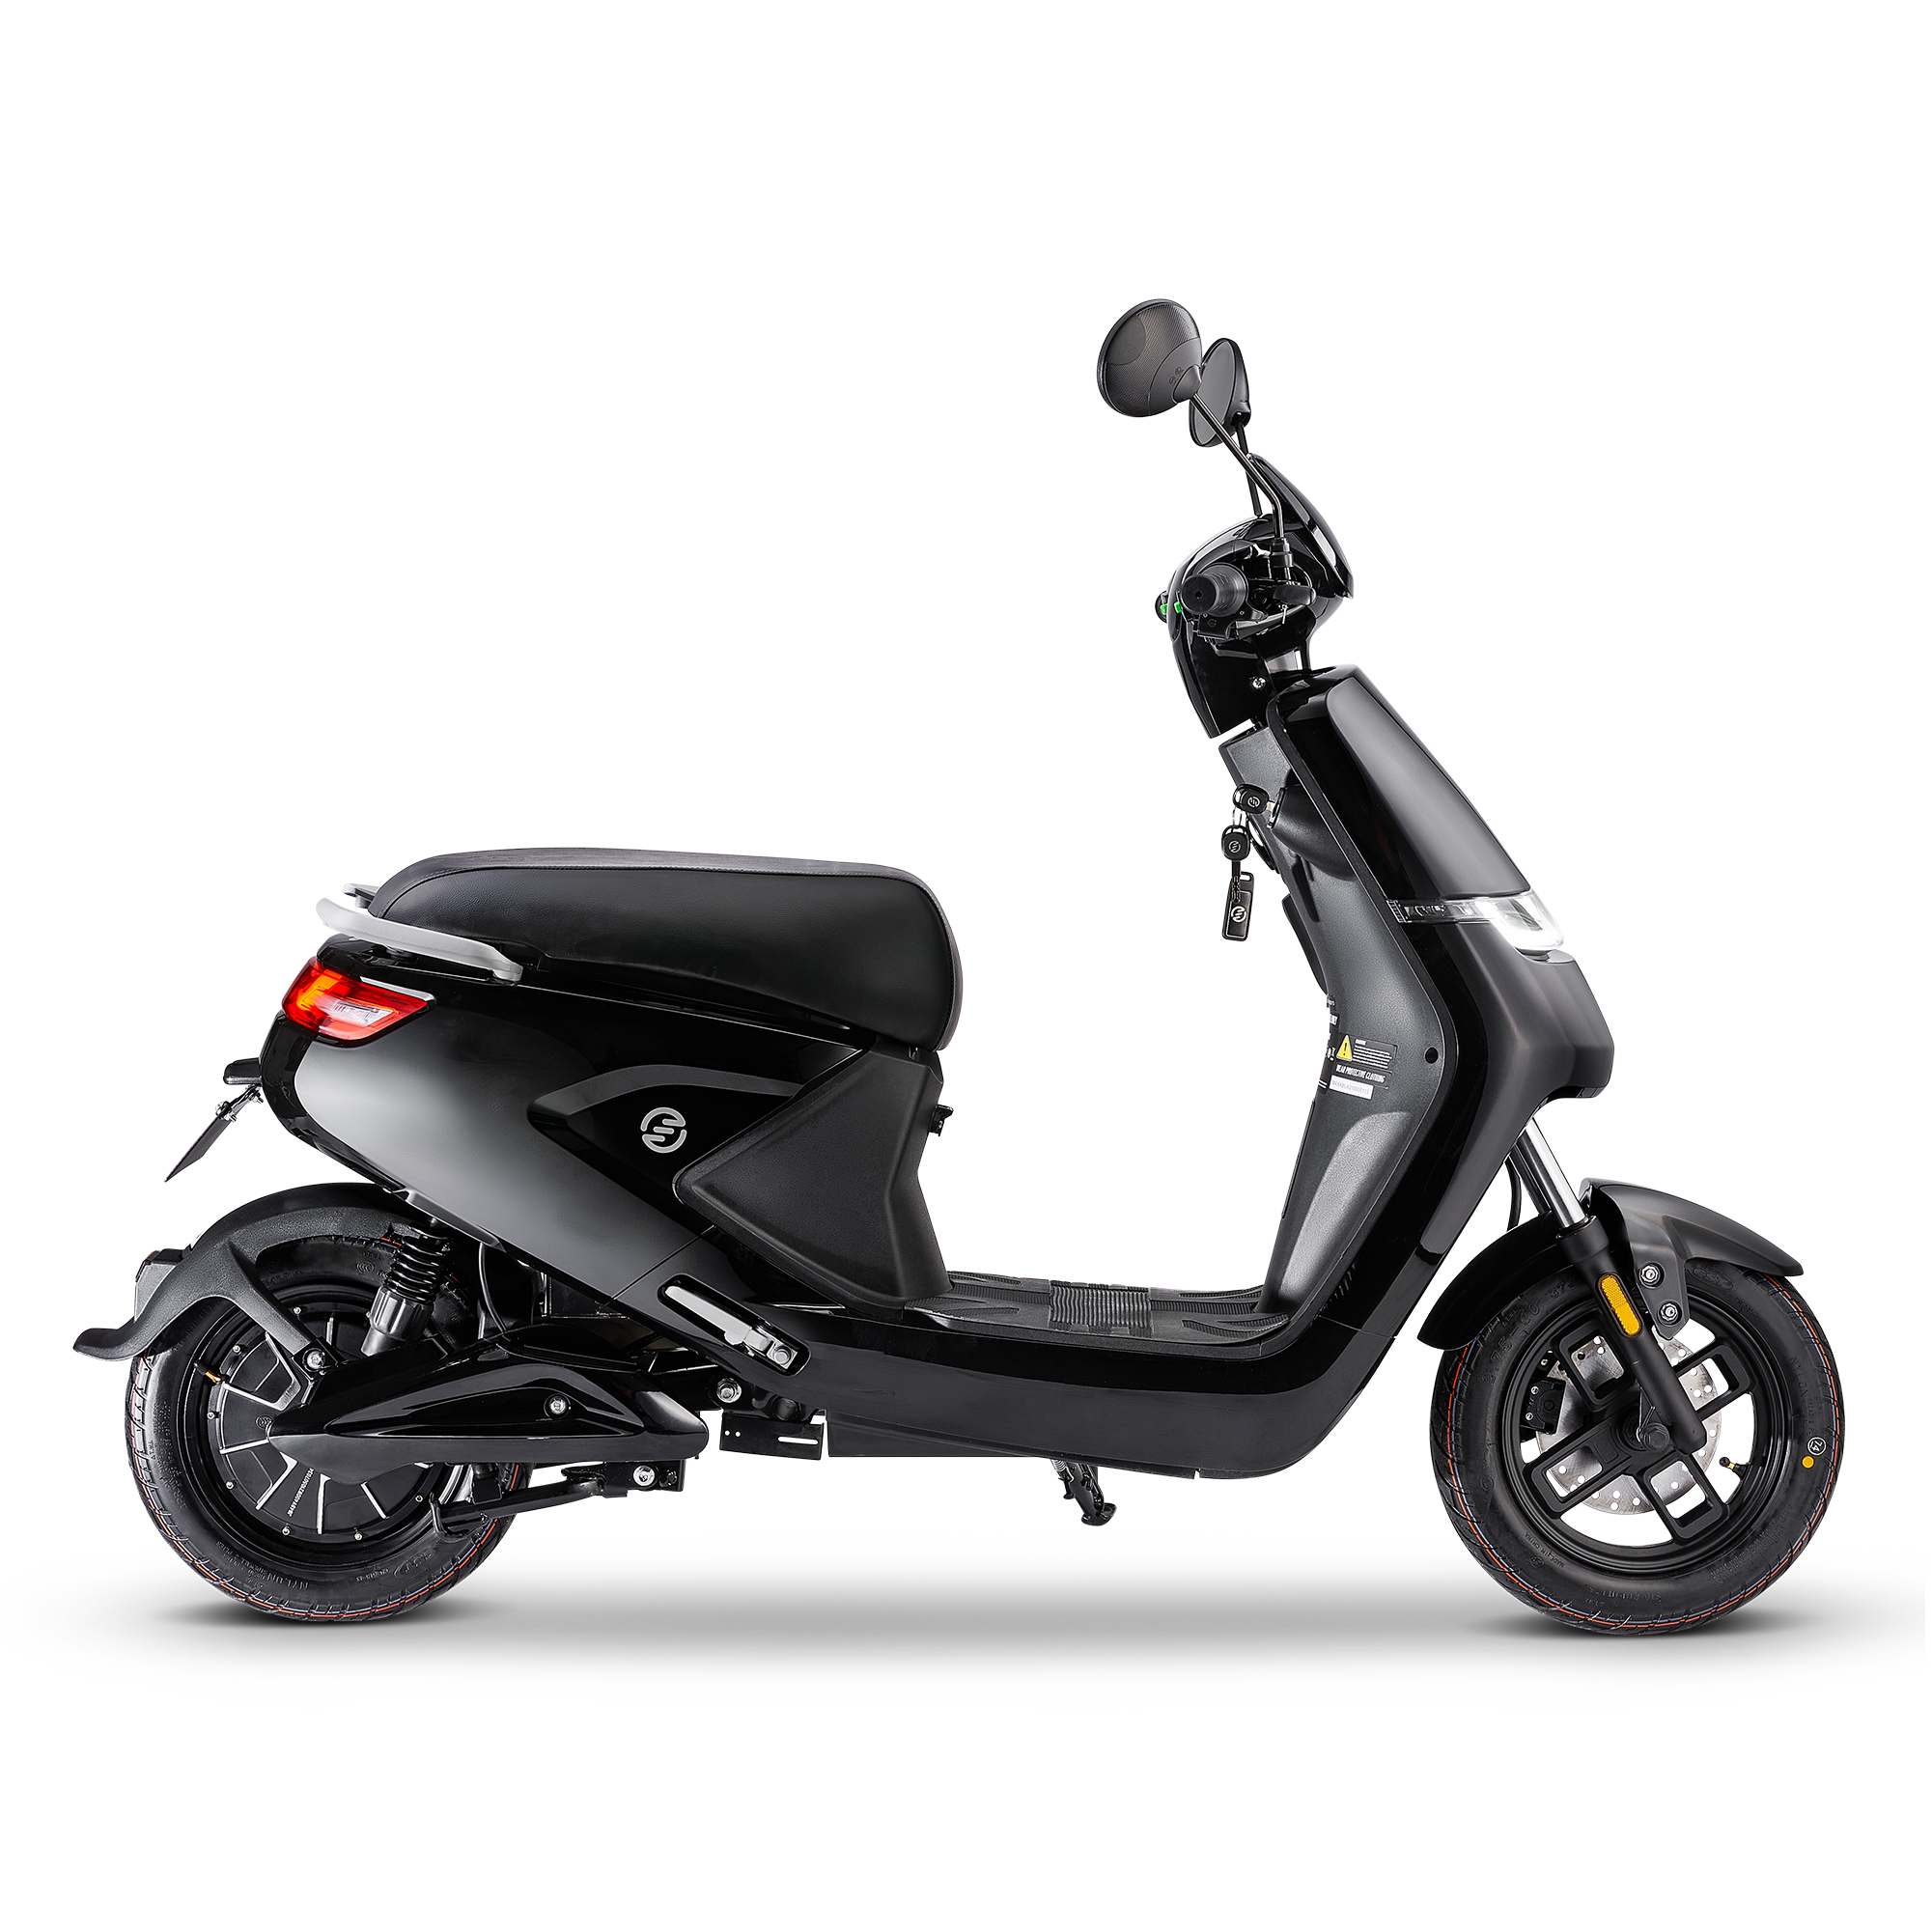 SWFT Maxx - 400W Compact E-Moped with Alarm & Under-seat Storage